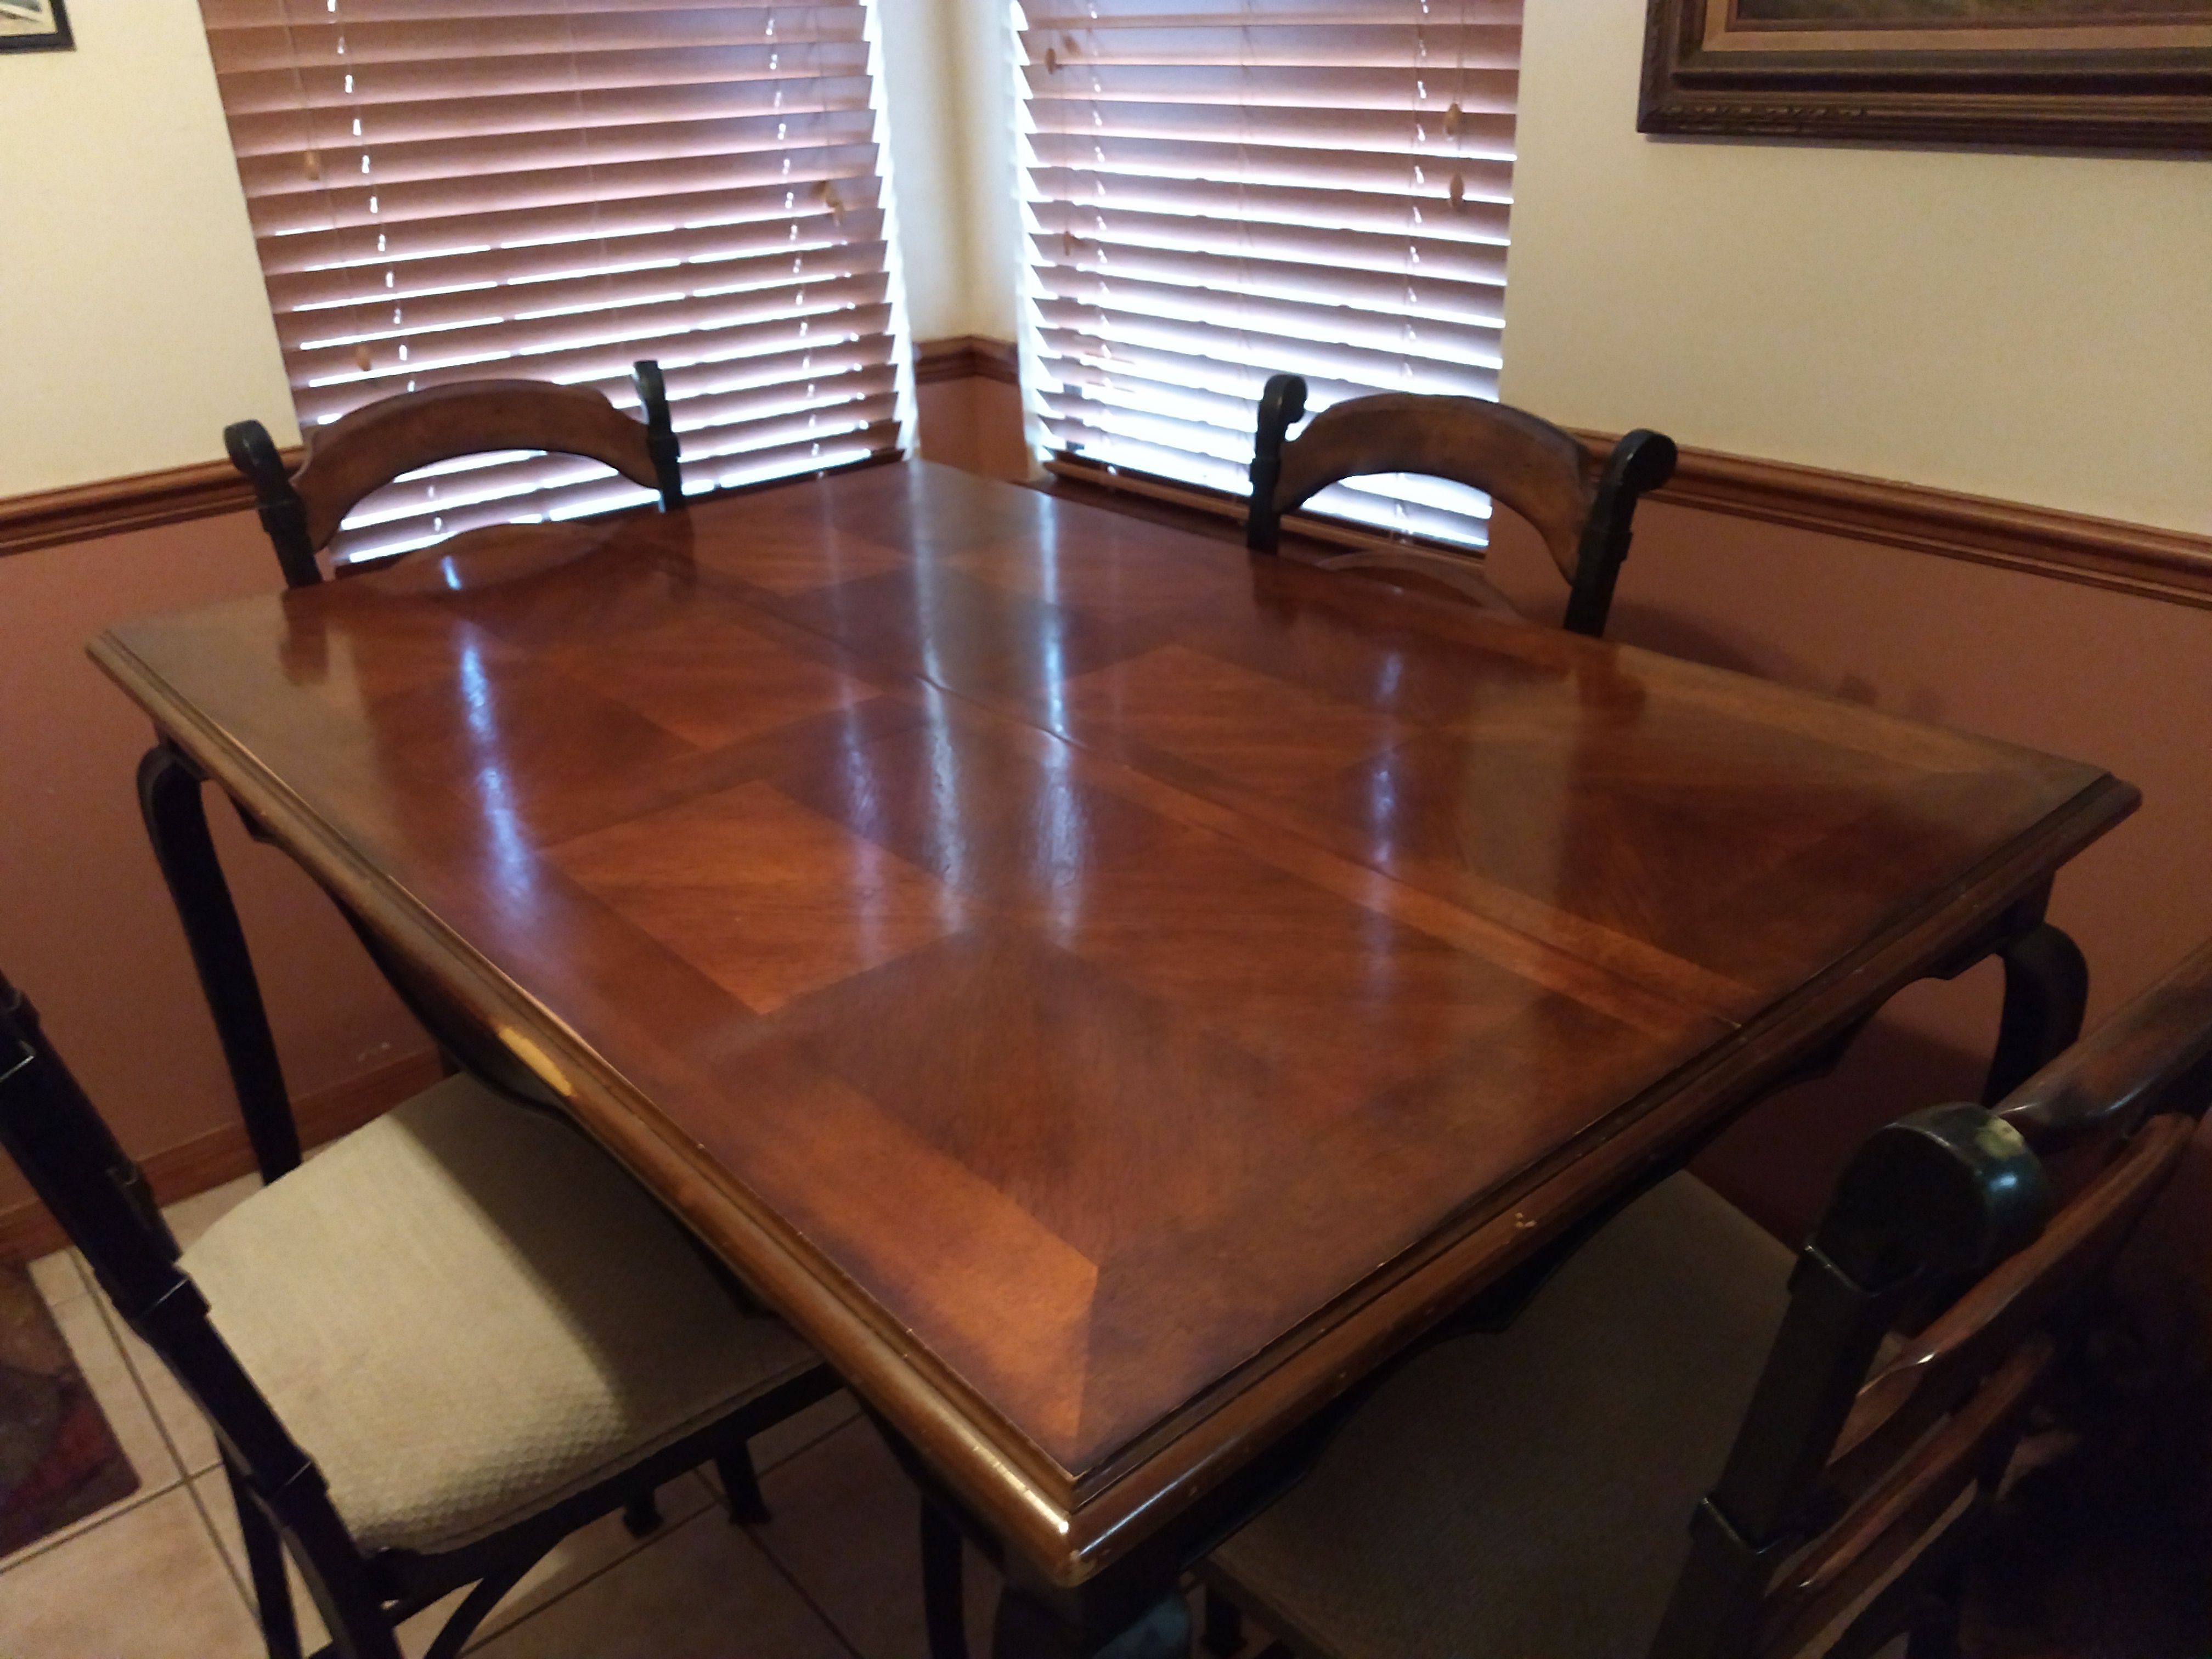 Pub Table 53X53 with Leif inserted 53X35 without has four cushioned chairs